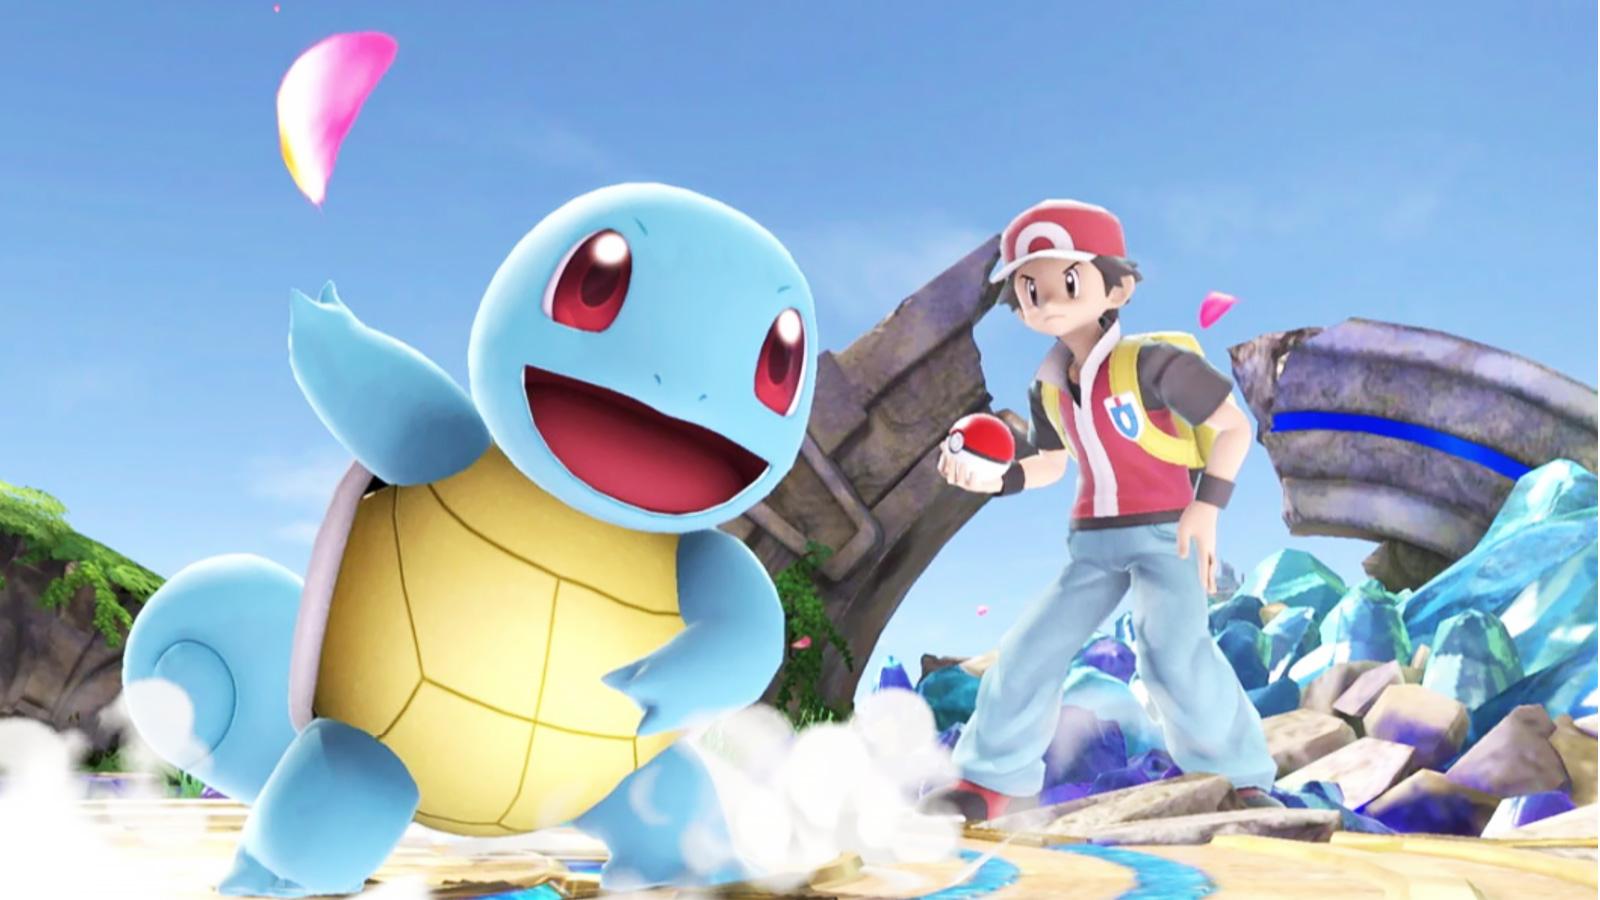 Top 5 Sword & Shield Pokemon we'd love to see as Smash Ultimate